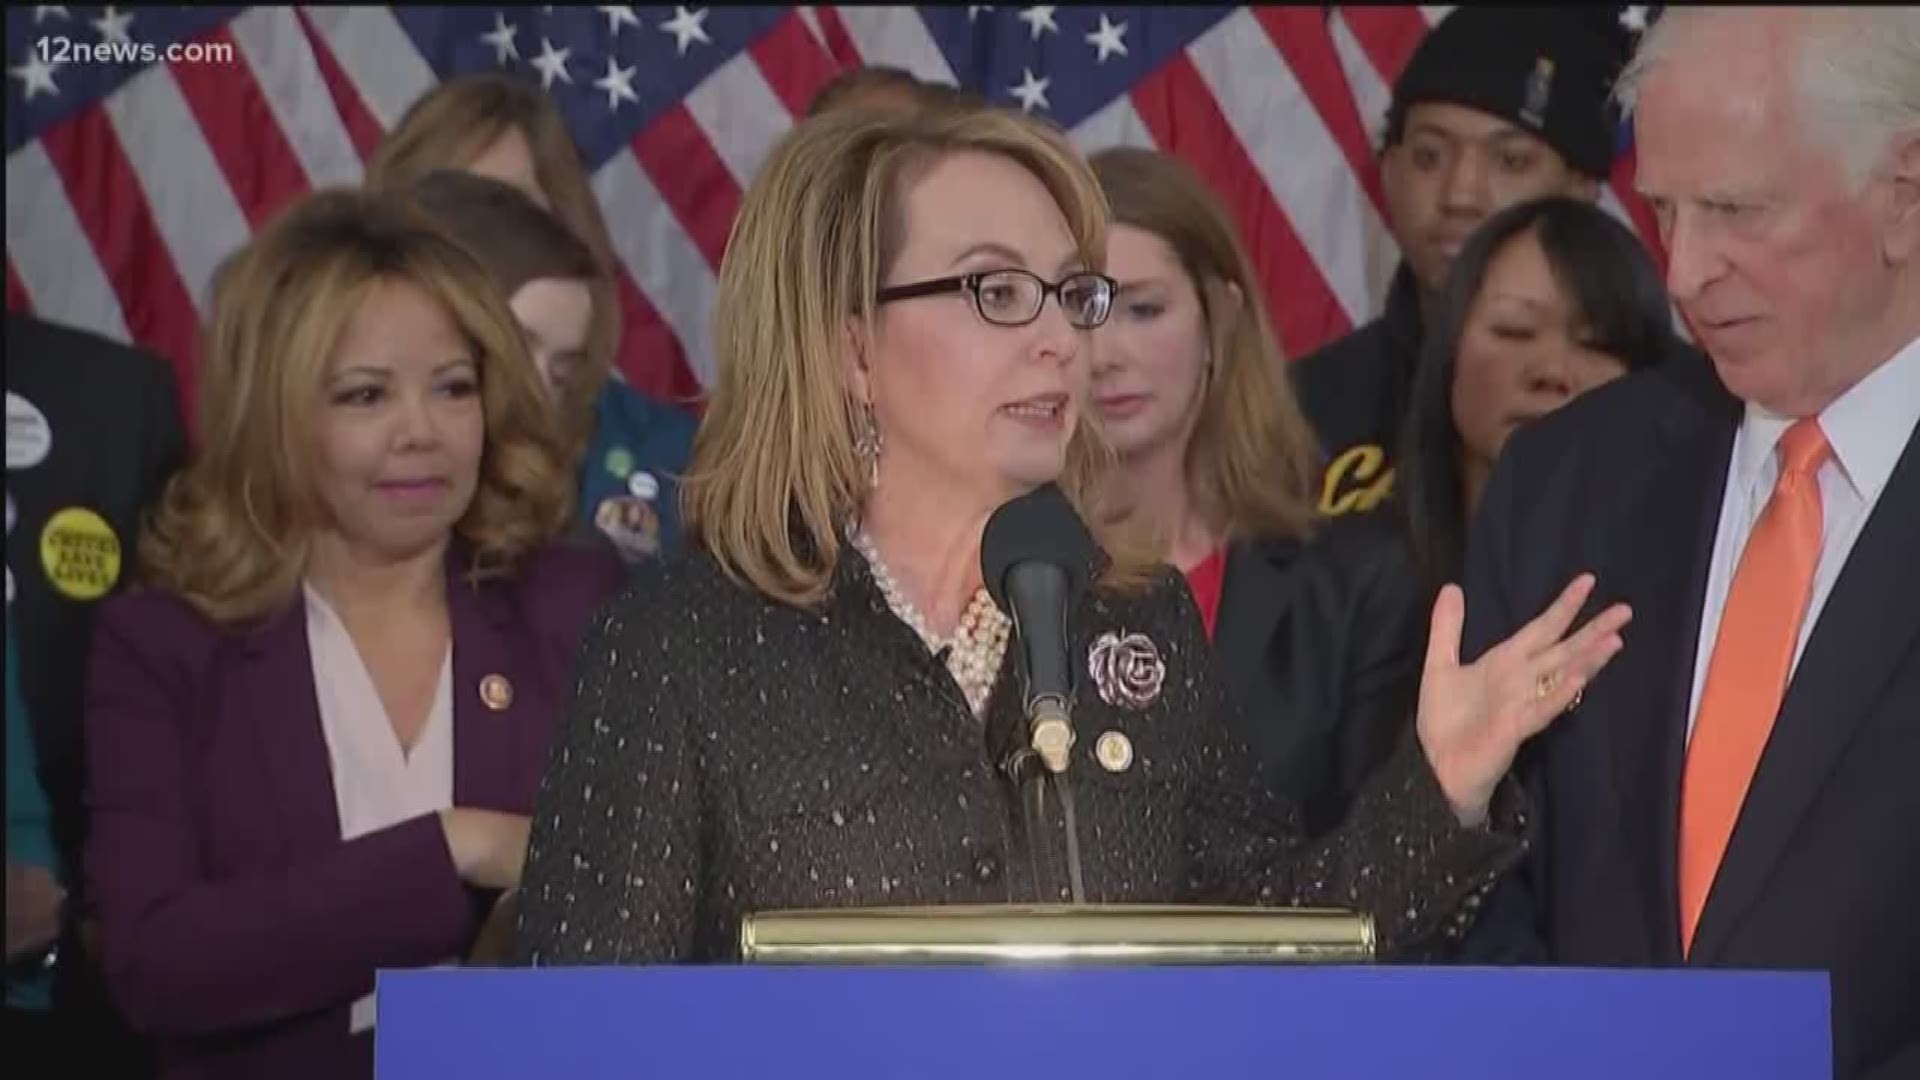 On the anniversary of the Tucson shooting massacre, former Congresswoman Gabrielle Giffords and House Democrats introduced a bill that would expand background checks on prospective gun buyers.